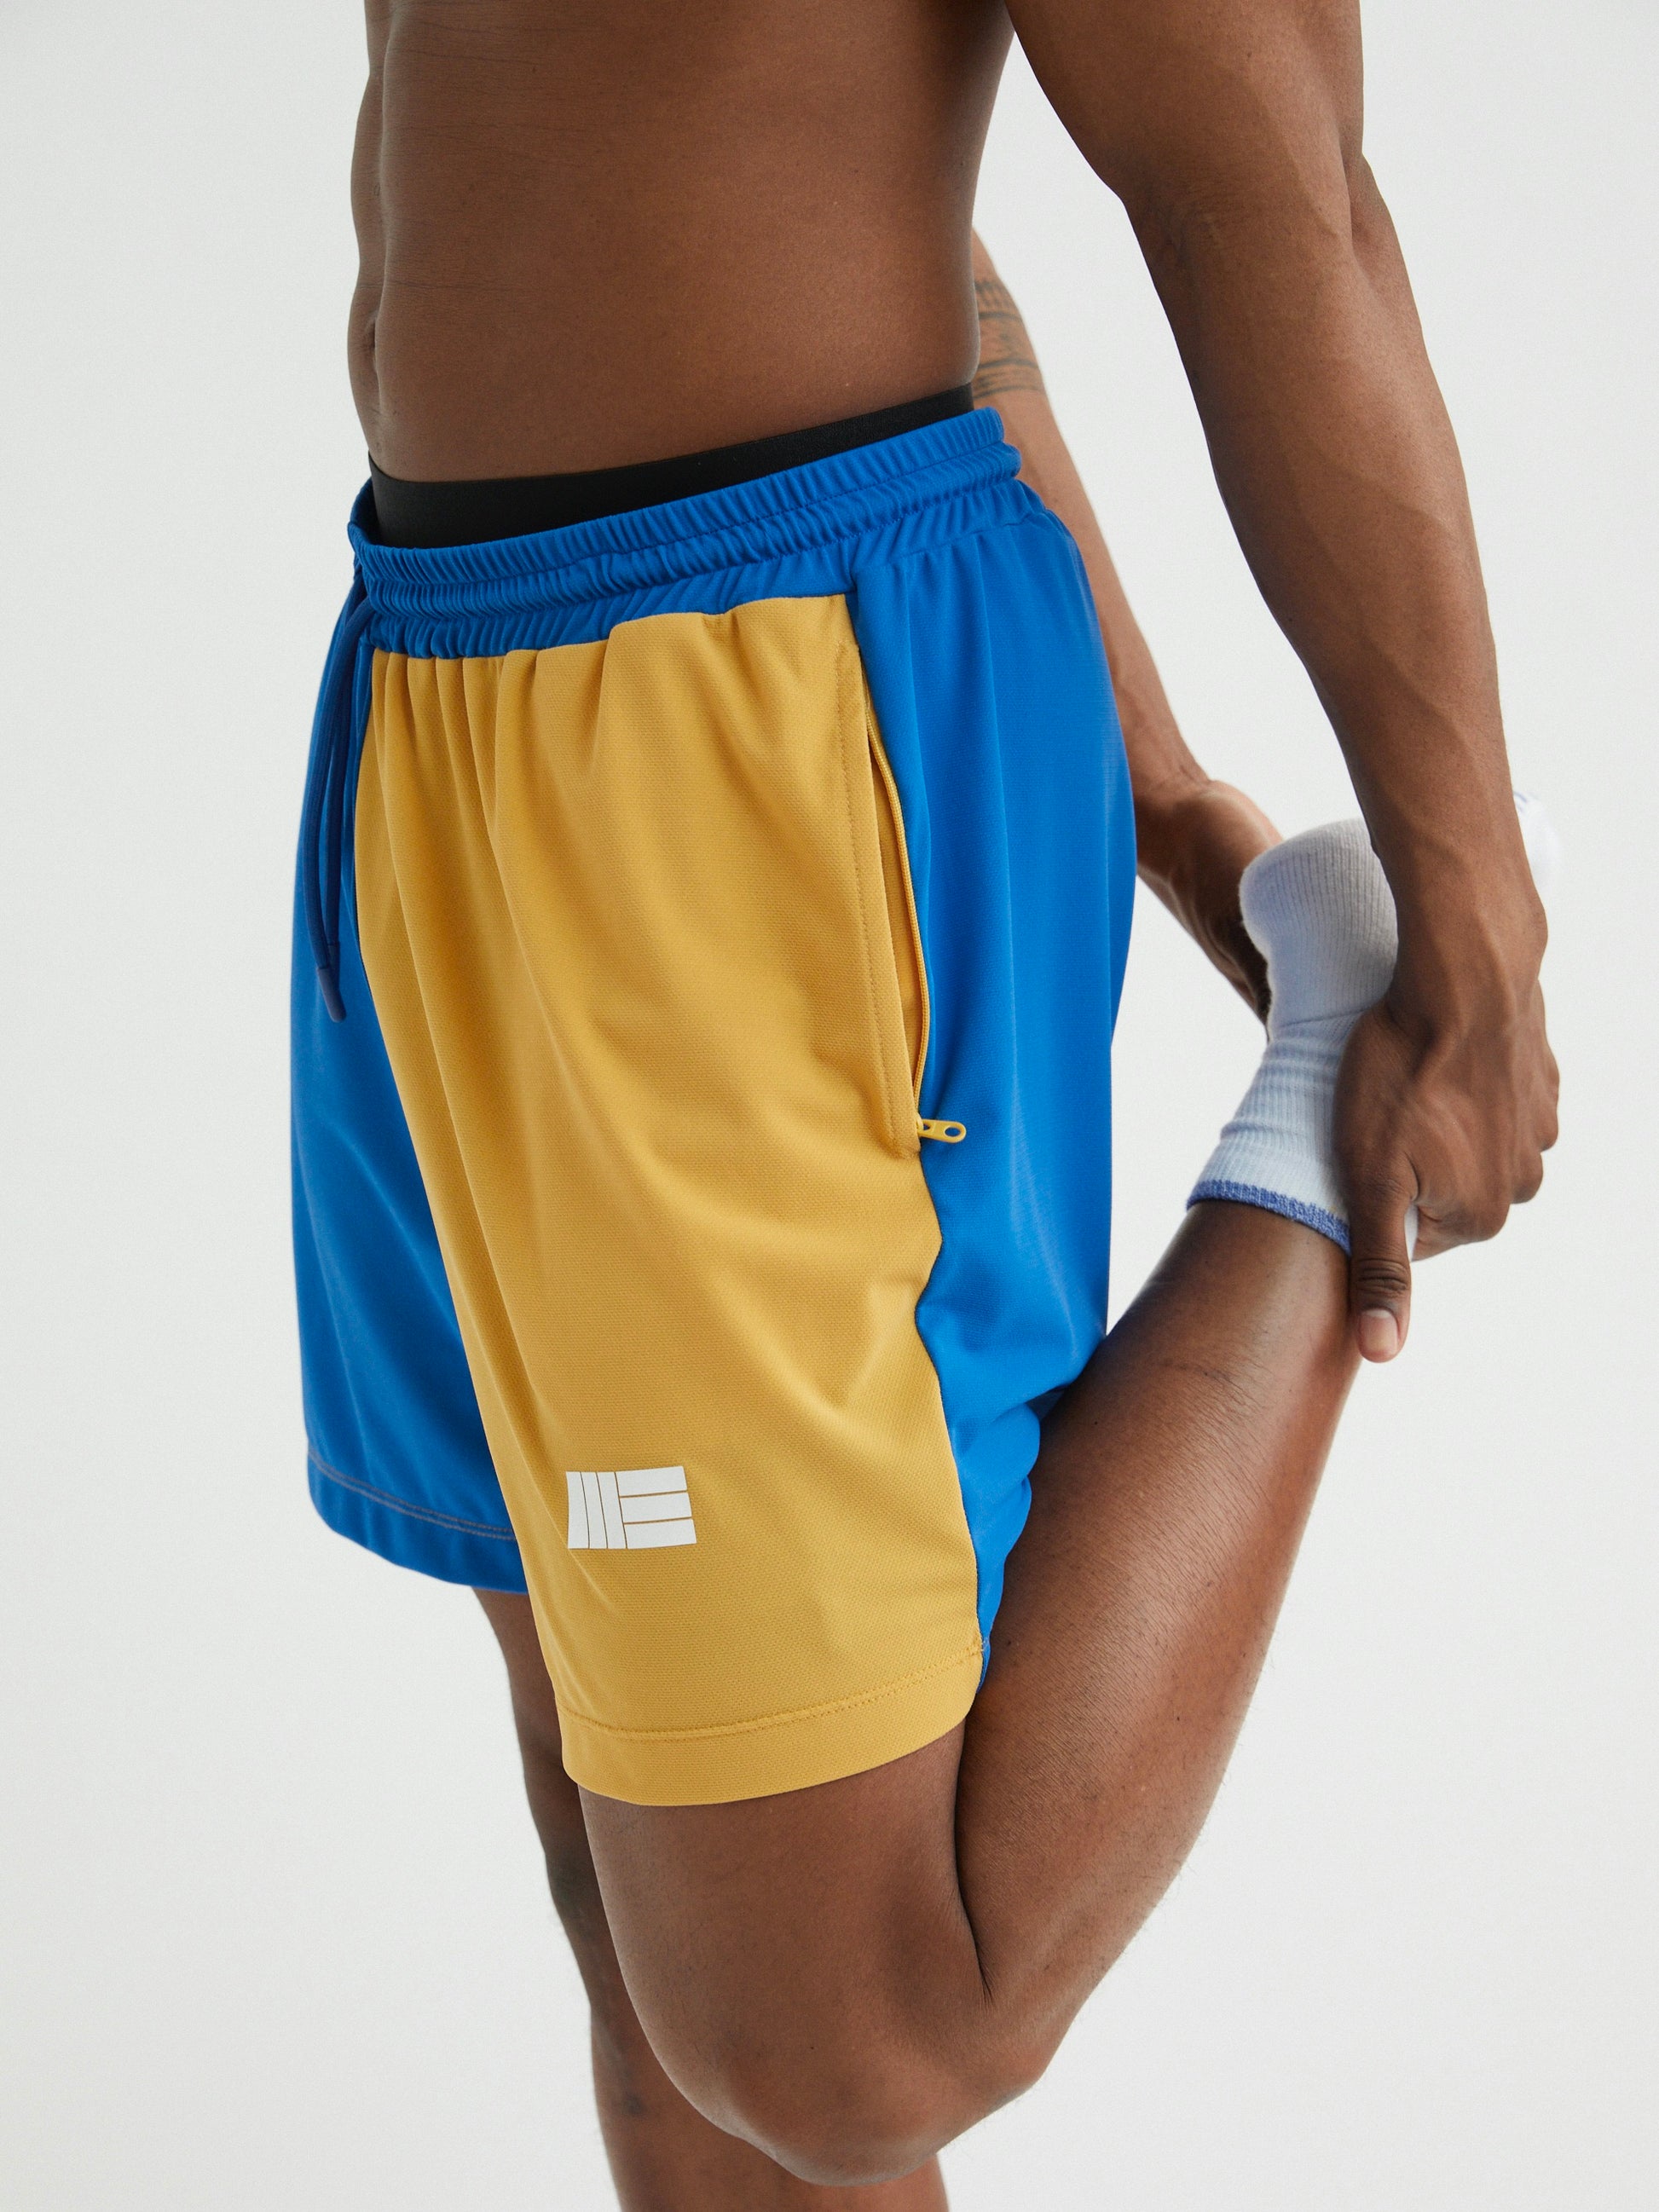 Mens Premium Athletic Sport Shorts Made in NYC - Blue / Yellow